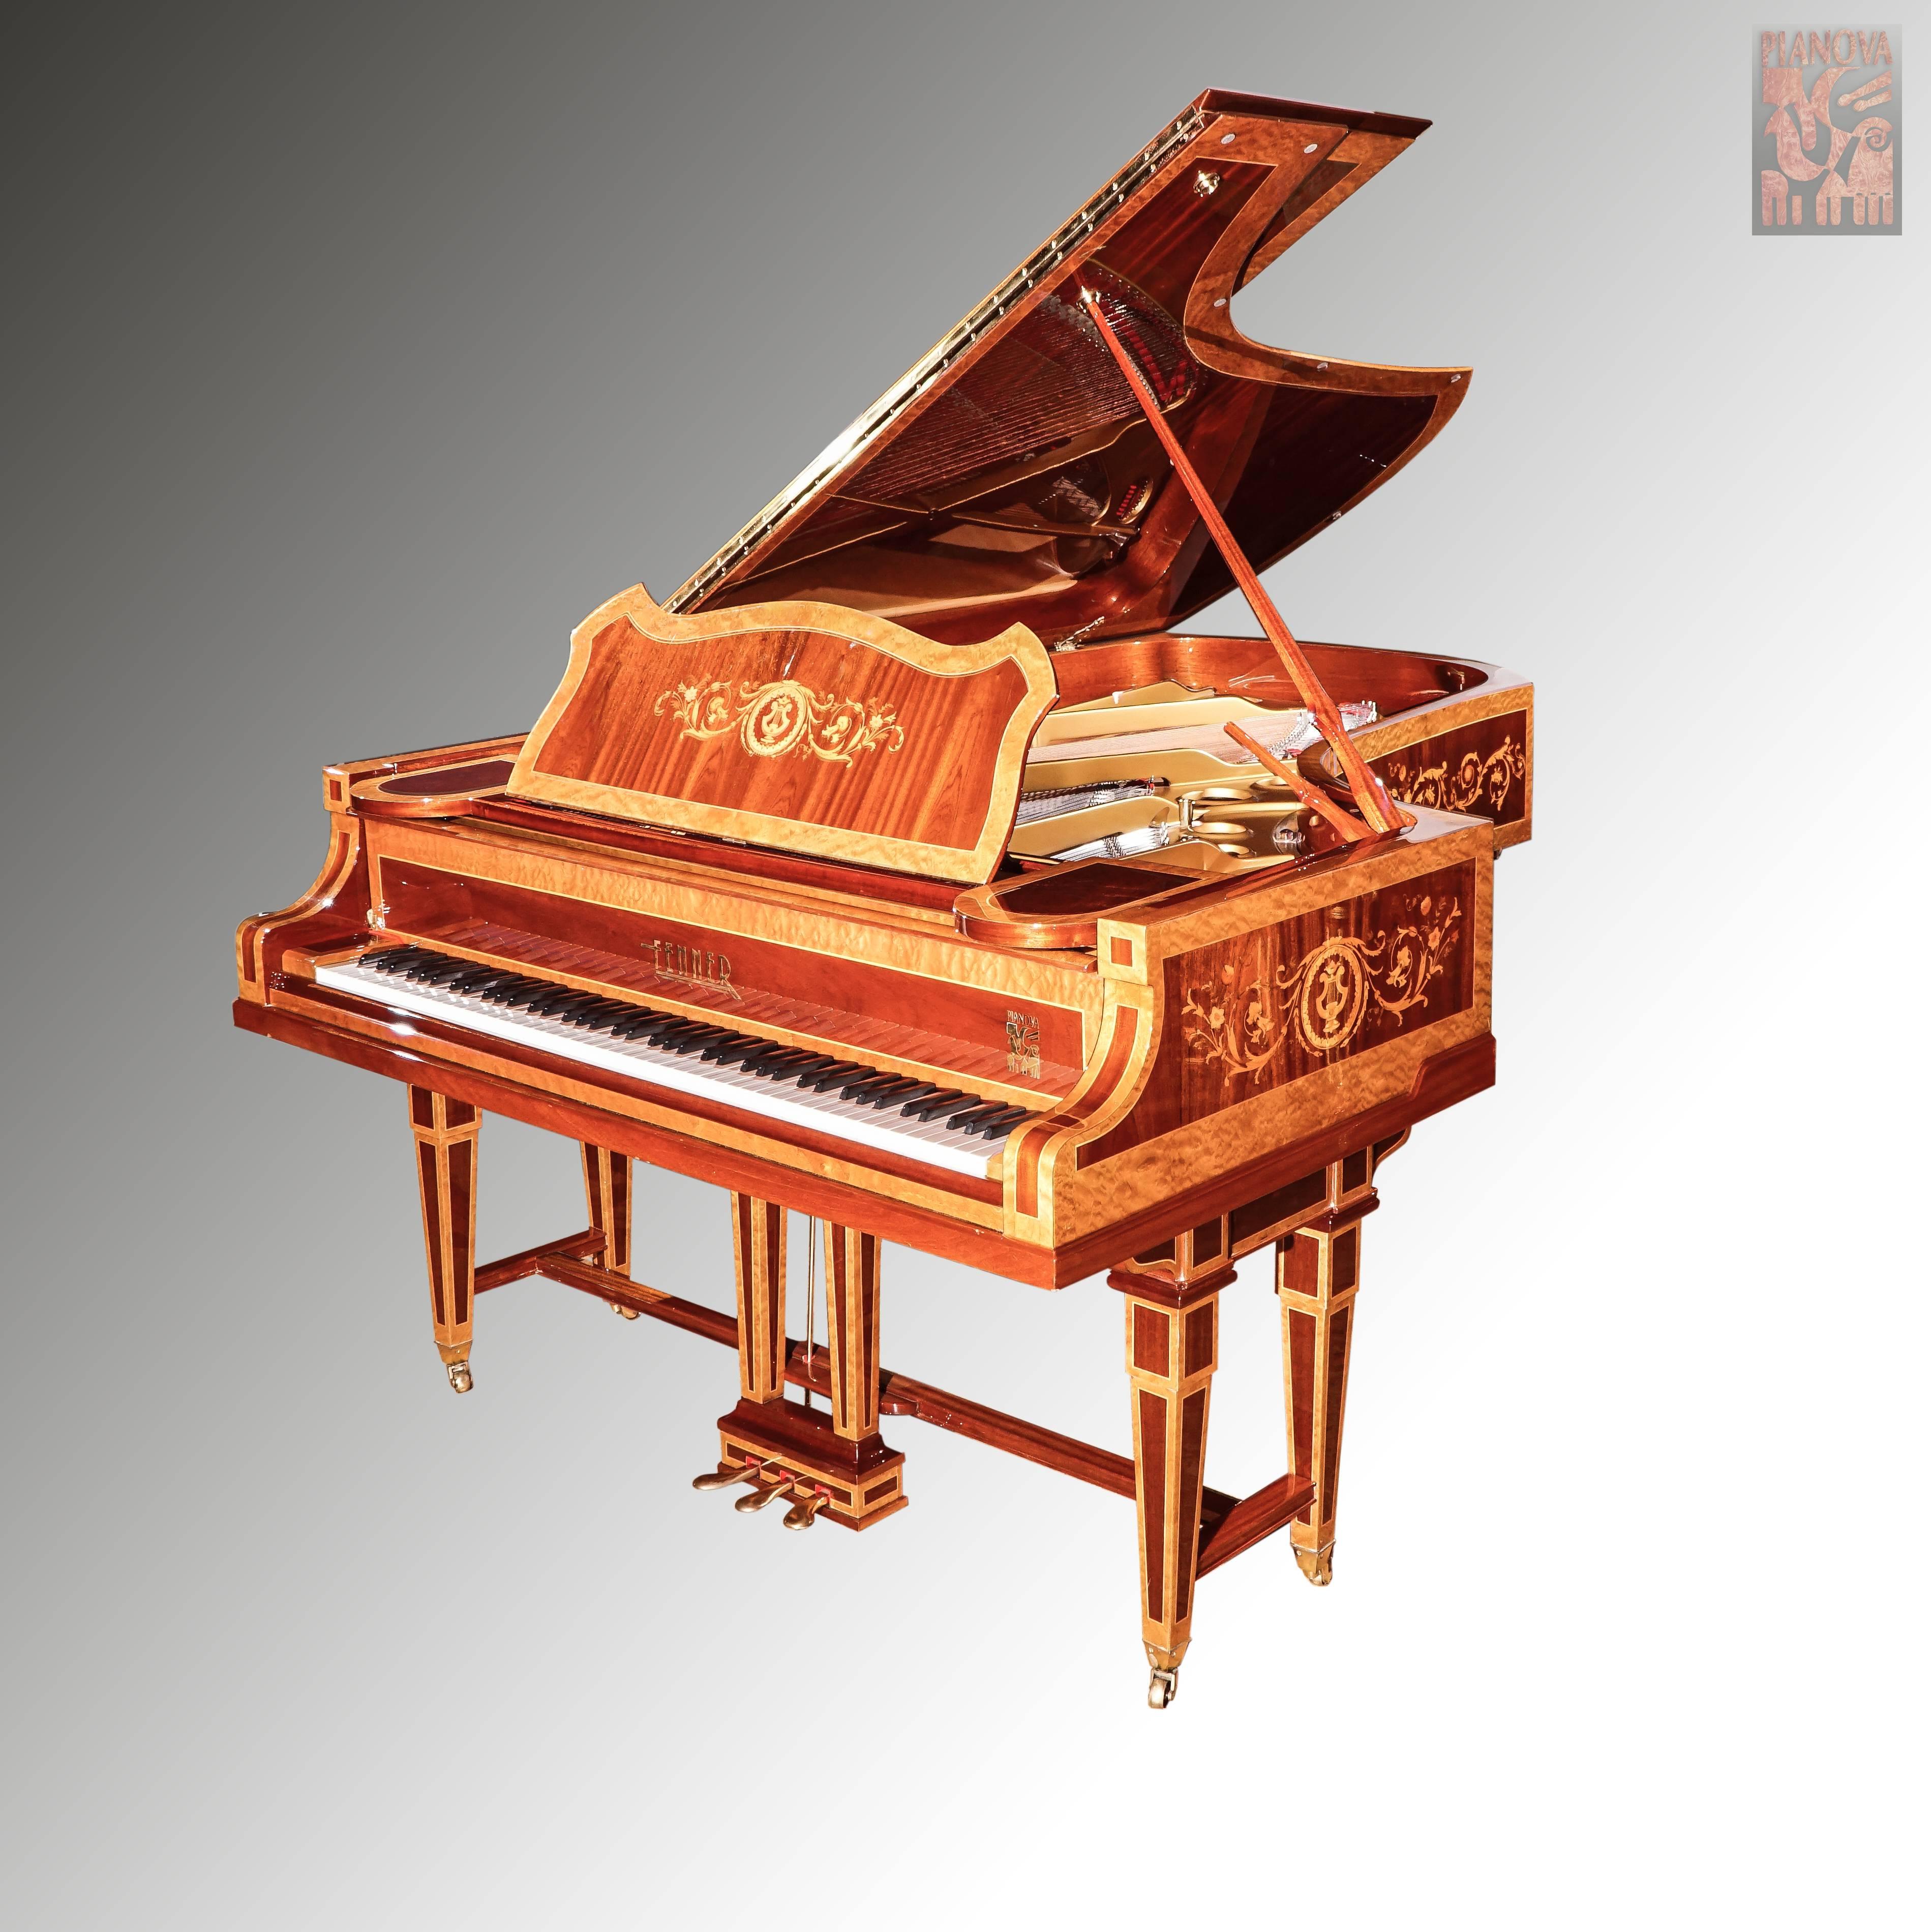 This one of a kind handmade luxury grand piano Fenner B Richard 7th has been built new in the leading German Piano workshop Pianova Klavierbau. 

We looked around and could not find the piano we'd been dreaming of. So we decided to build it